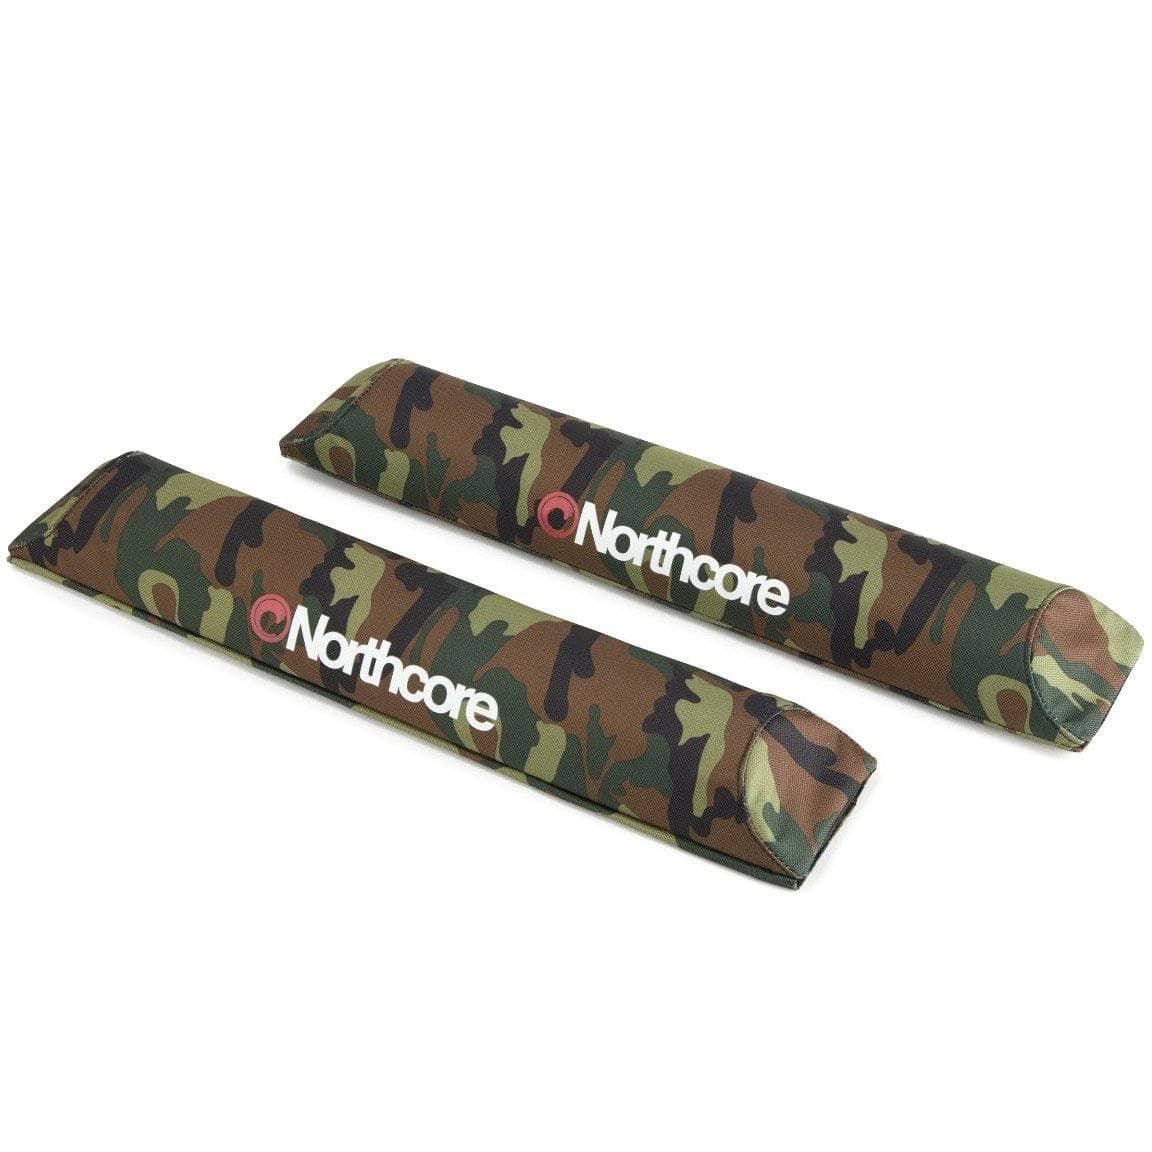 Northcore Aero Roof Bar Pads Camo O/S (one size) Car Hard Roof Rack Pads by Northcore